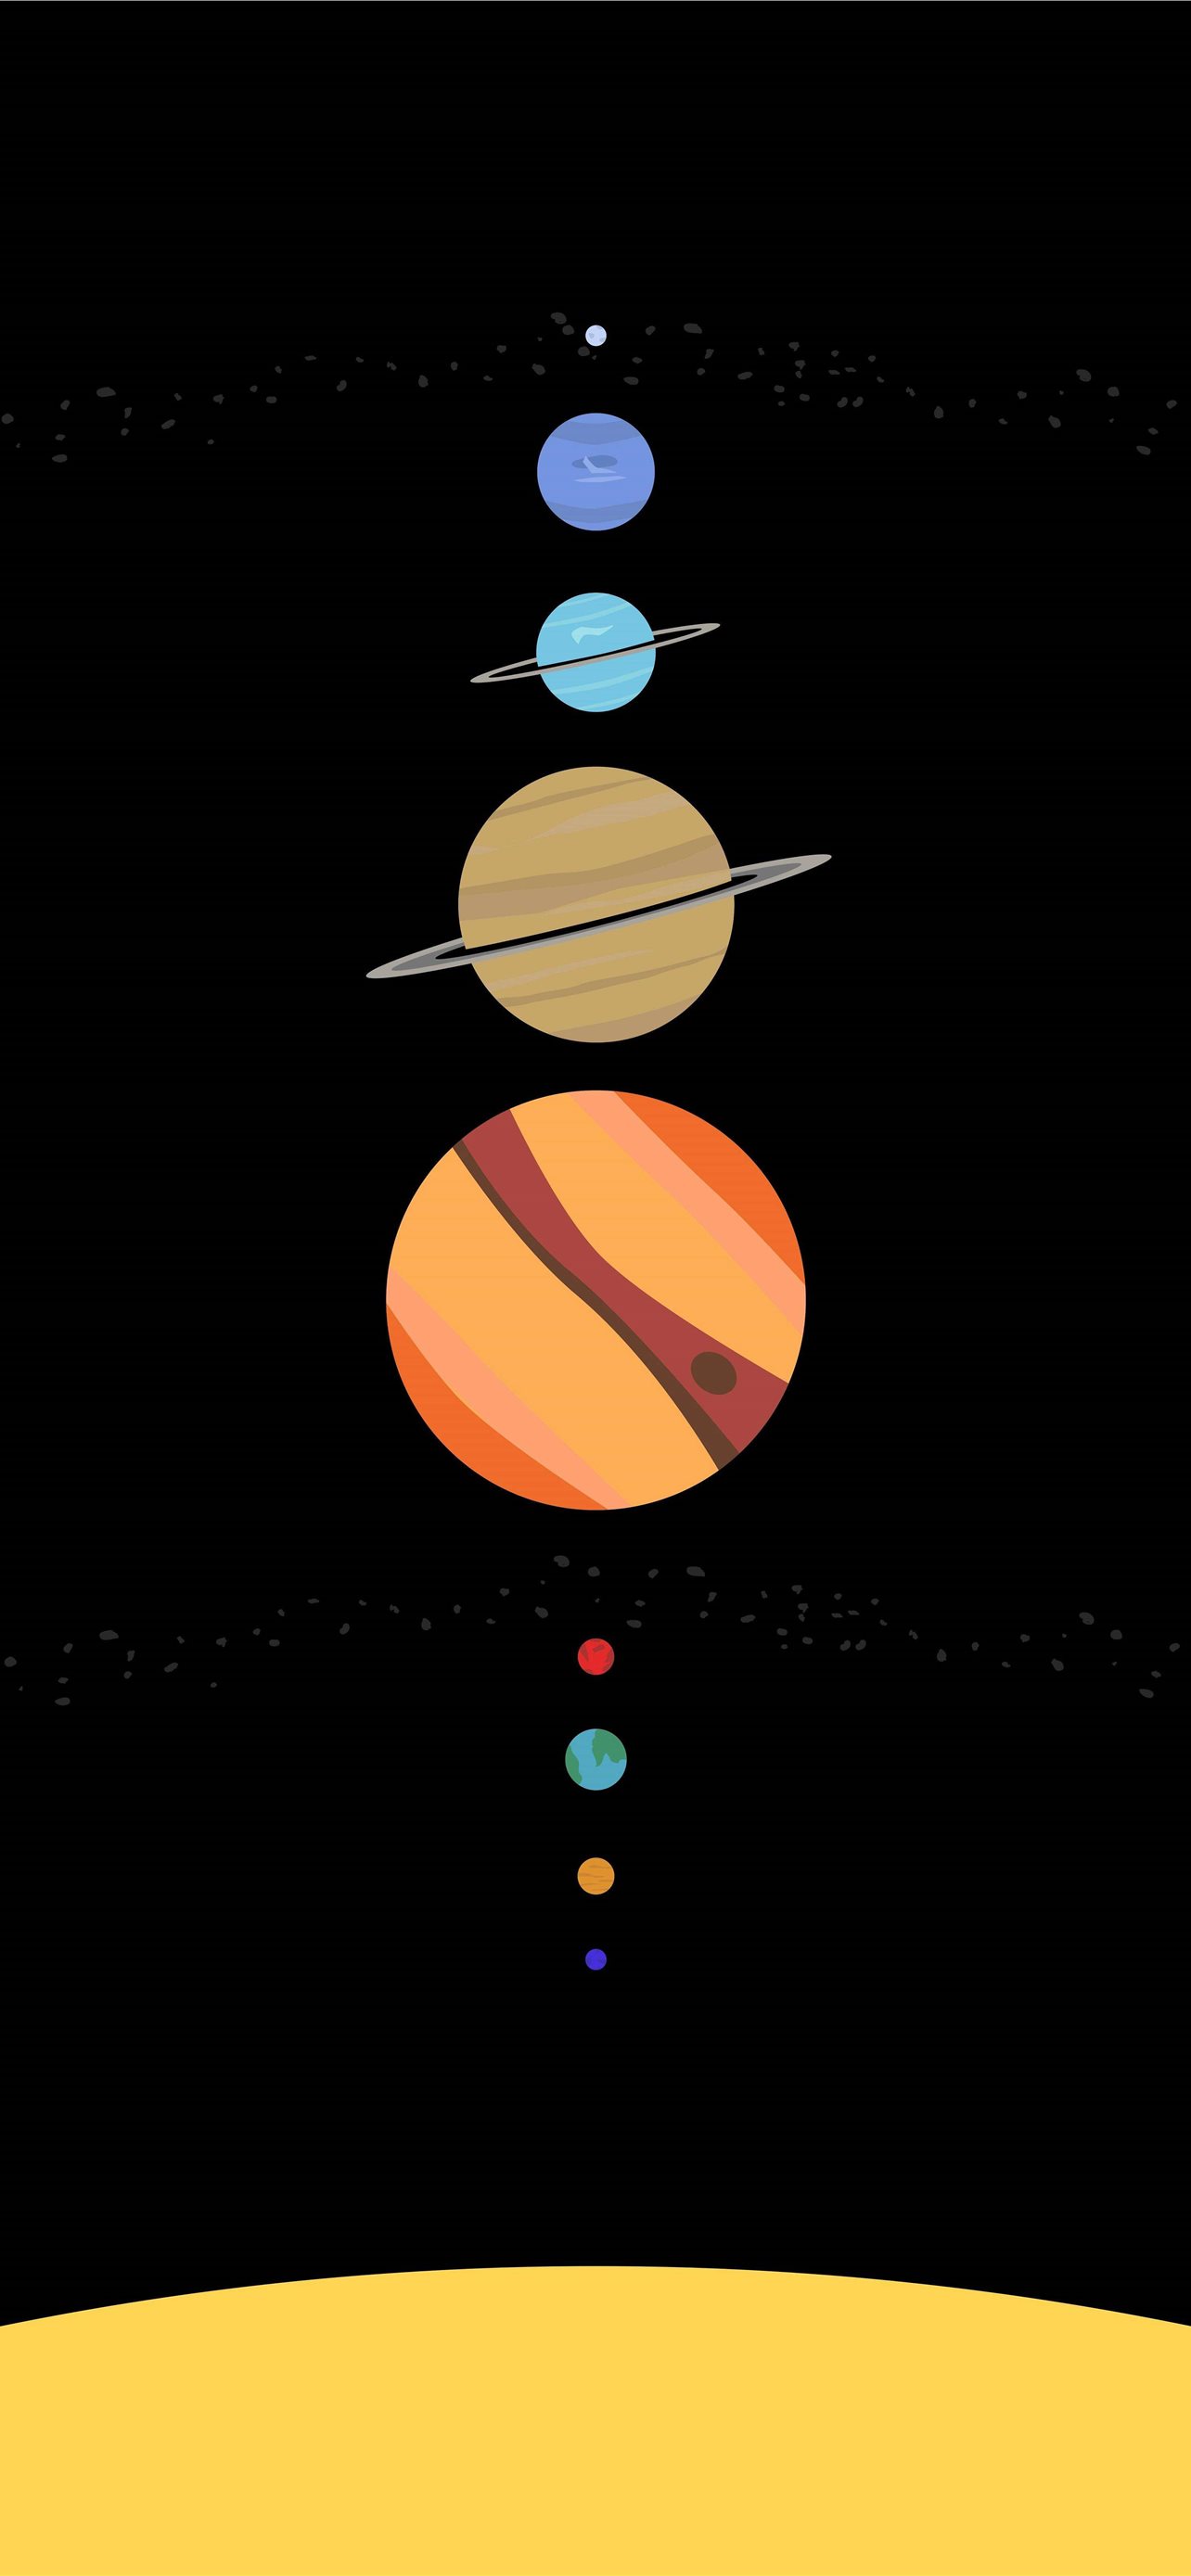 Our Solar System iPhone Wallpaper  iPhone Wallpapers